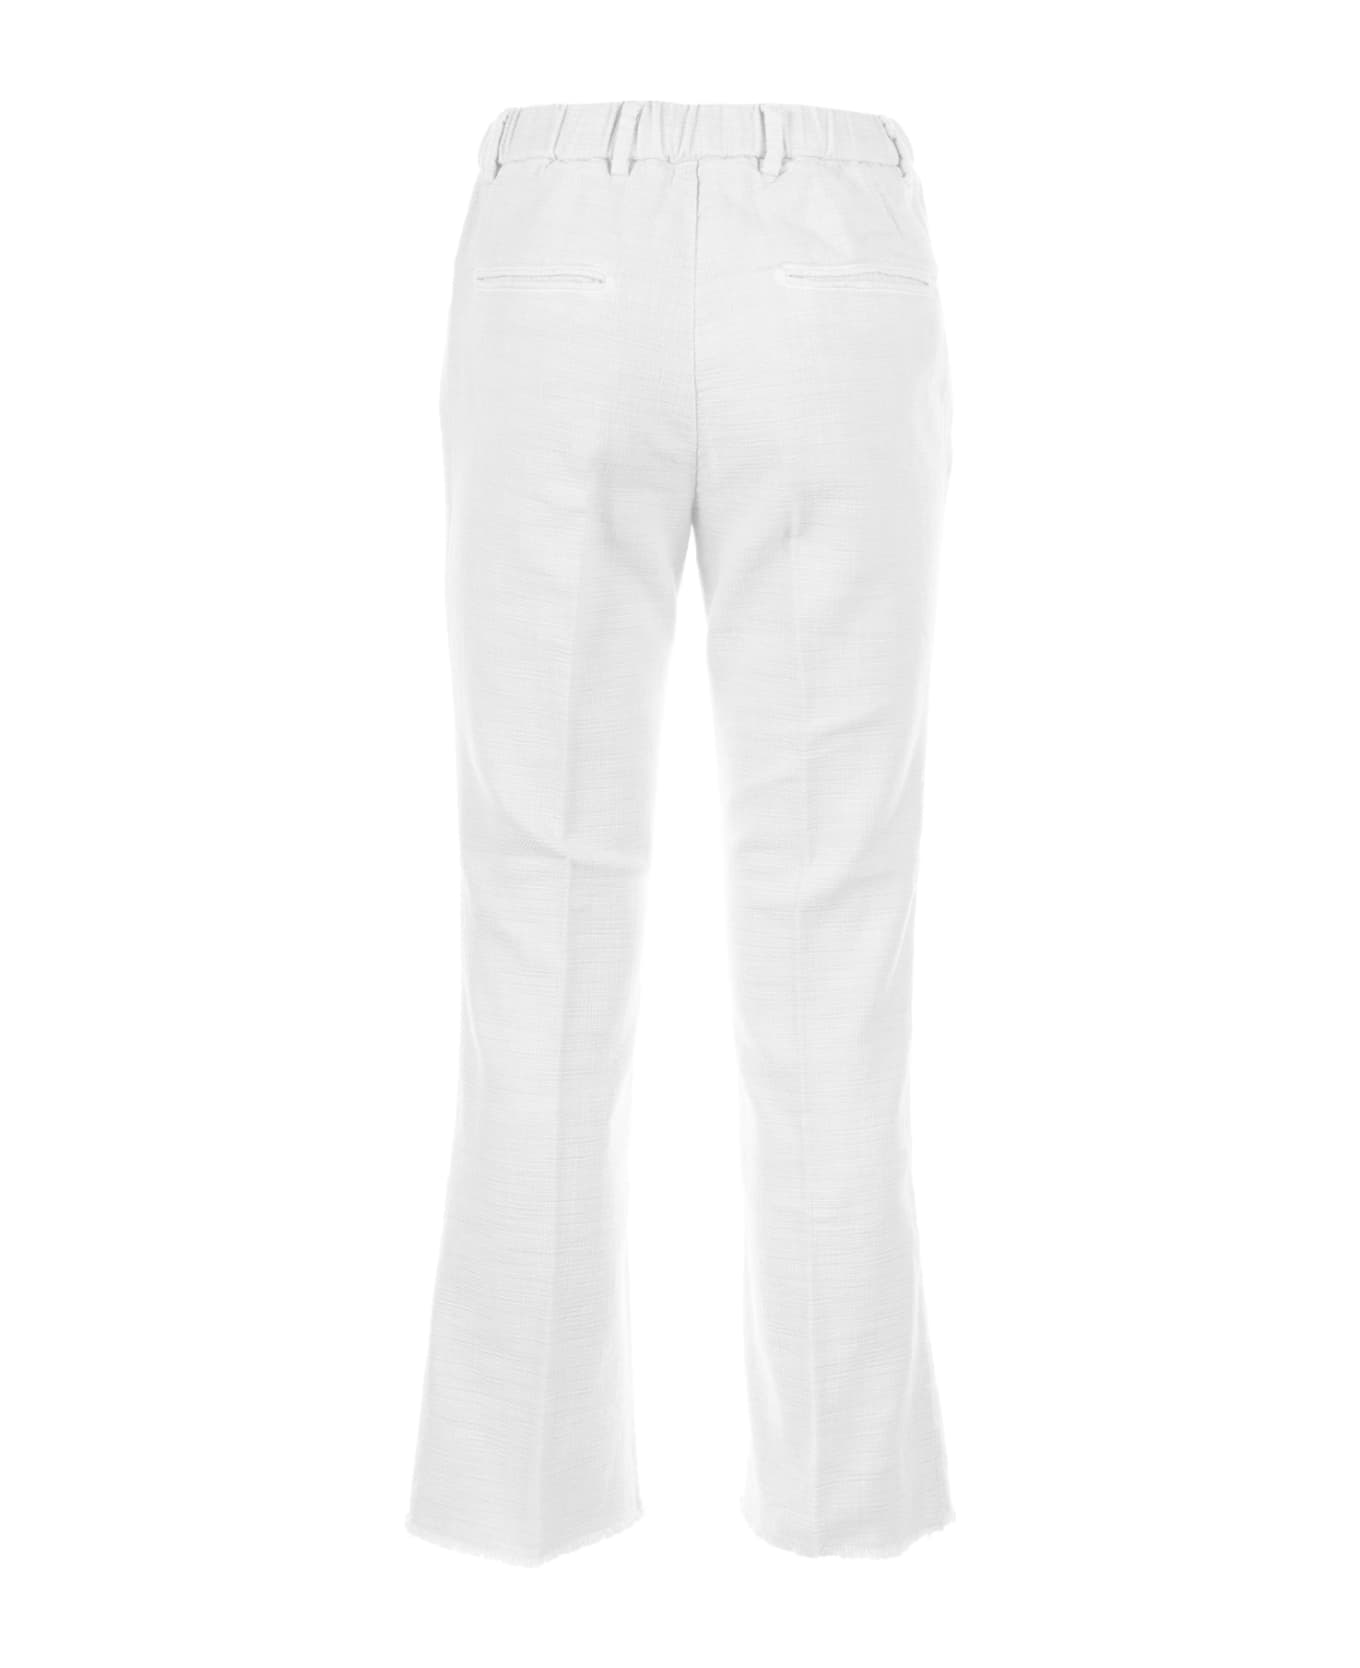 Myths Women's White Trousers - OFF WHITE ボトムス